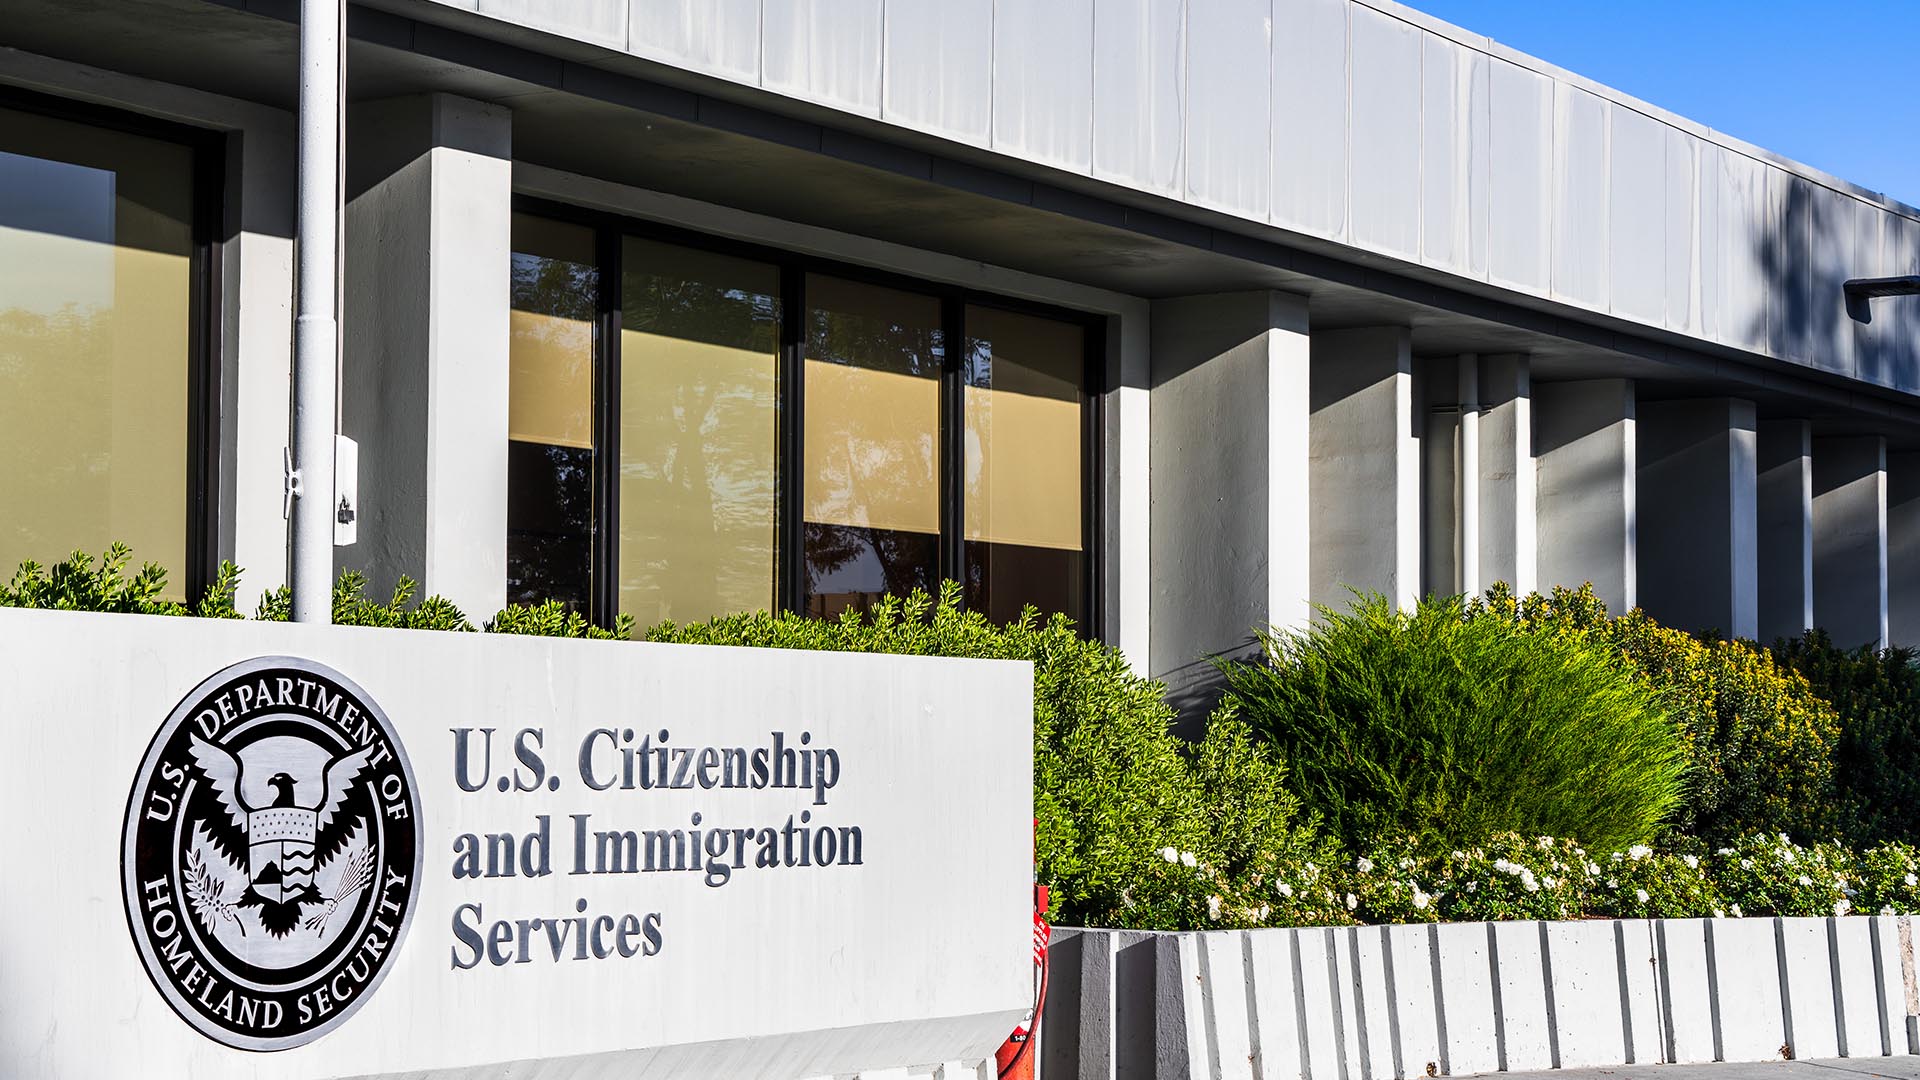 U.S. Citizenship and Immigration Services (USCIS) office located in Silicon Valley